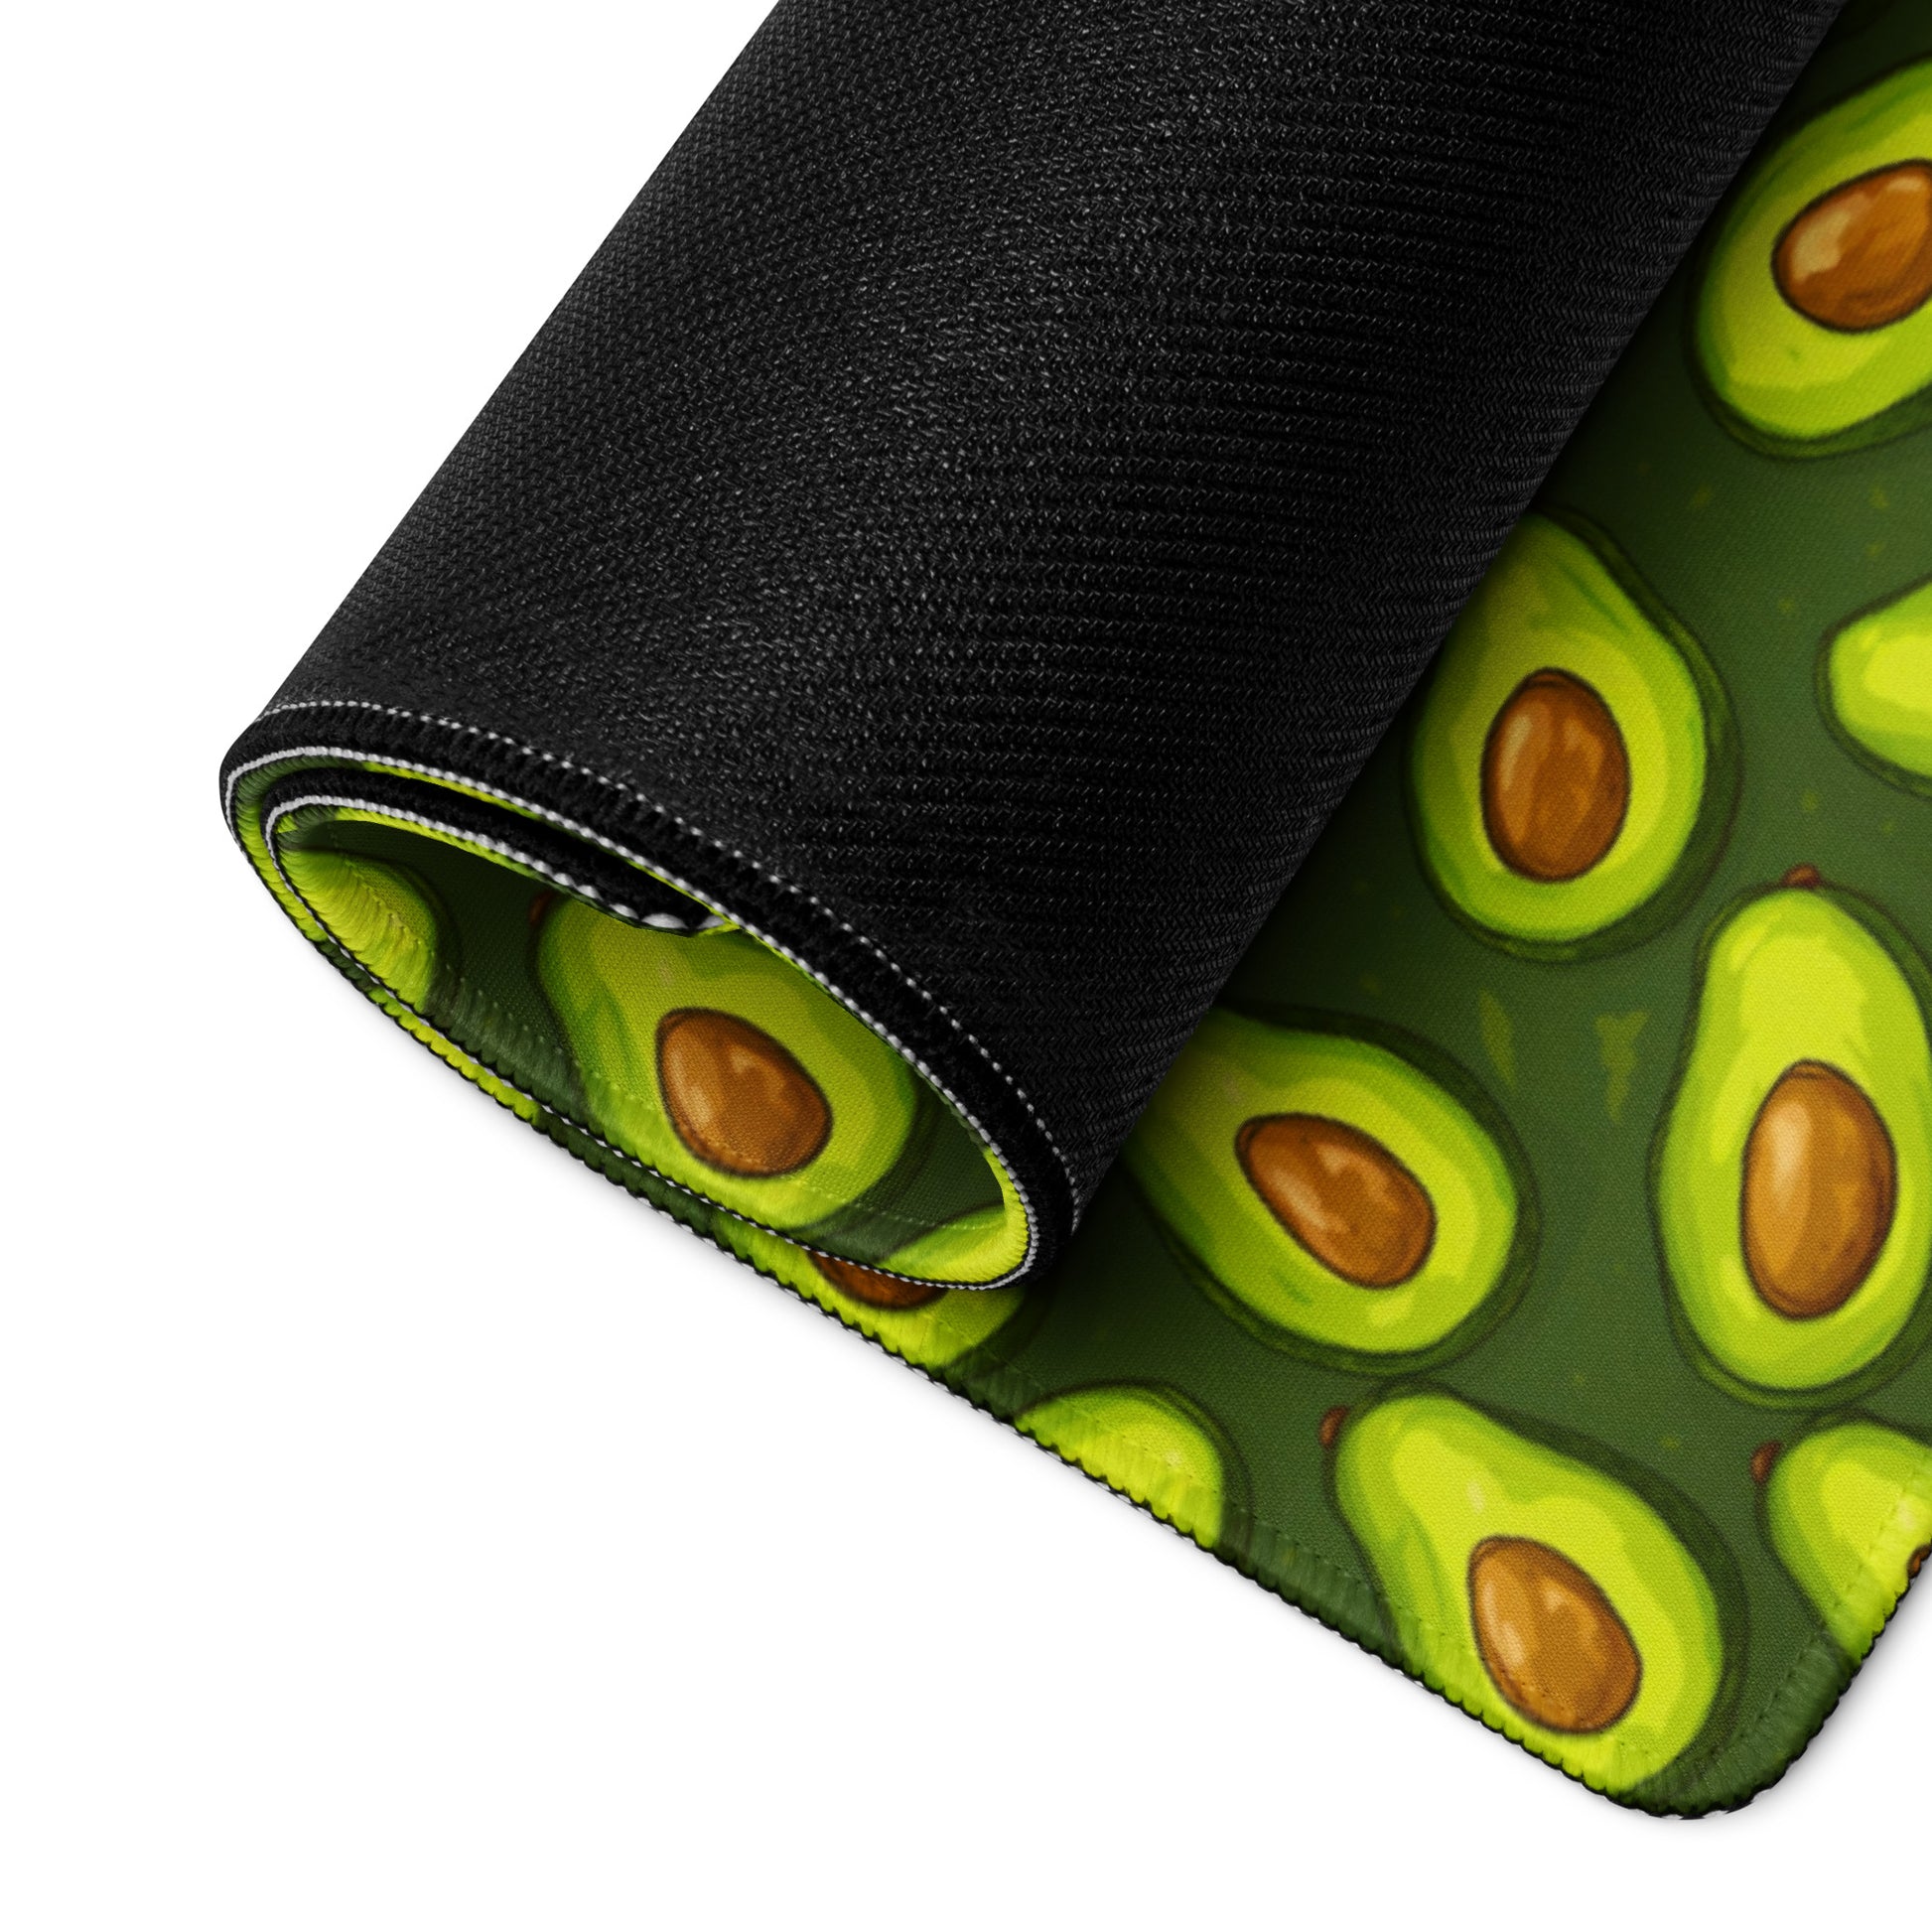 A 36" x 18" desk pad with lots of avocados on it rolled up. Green in color.